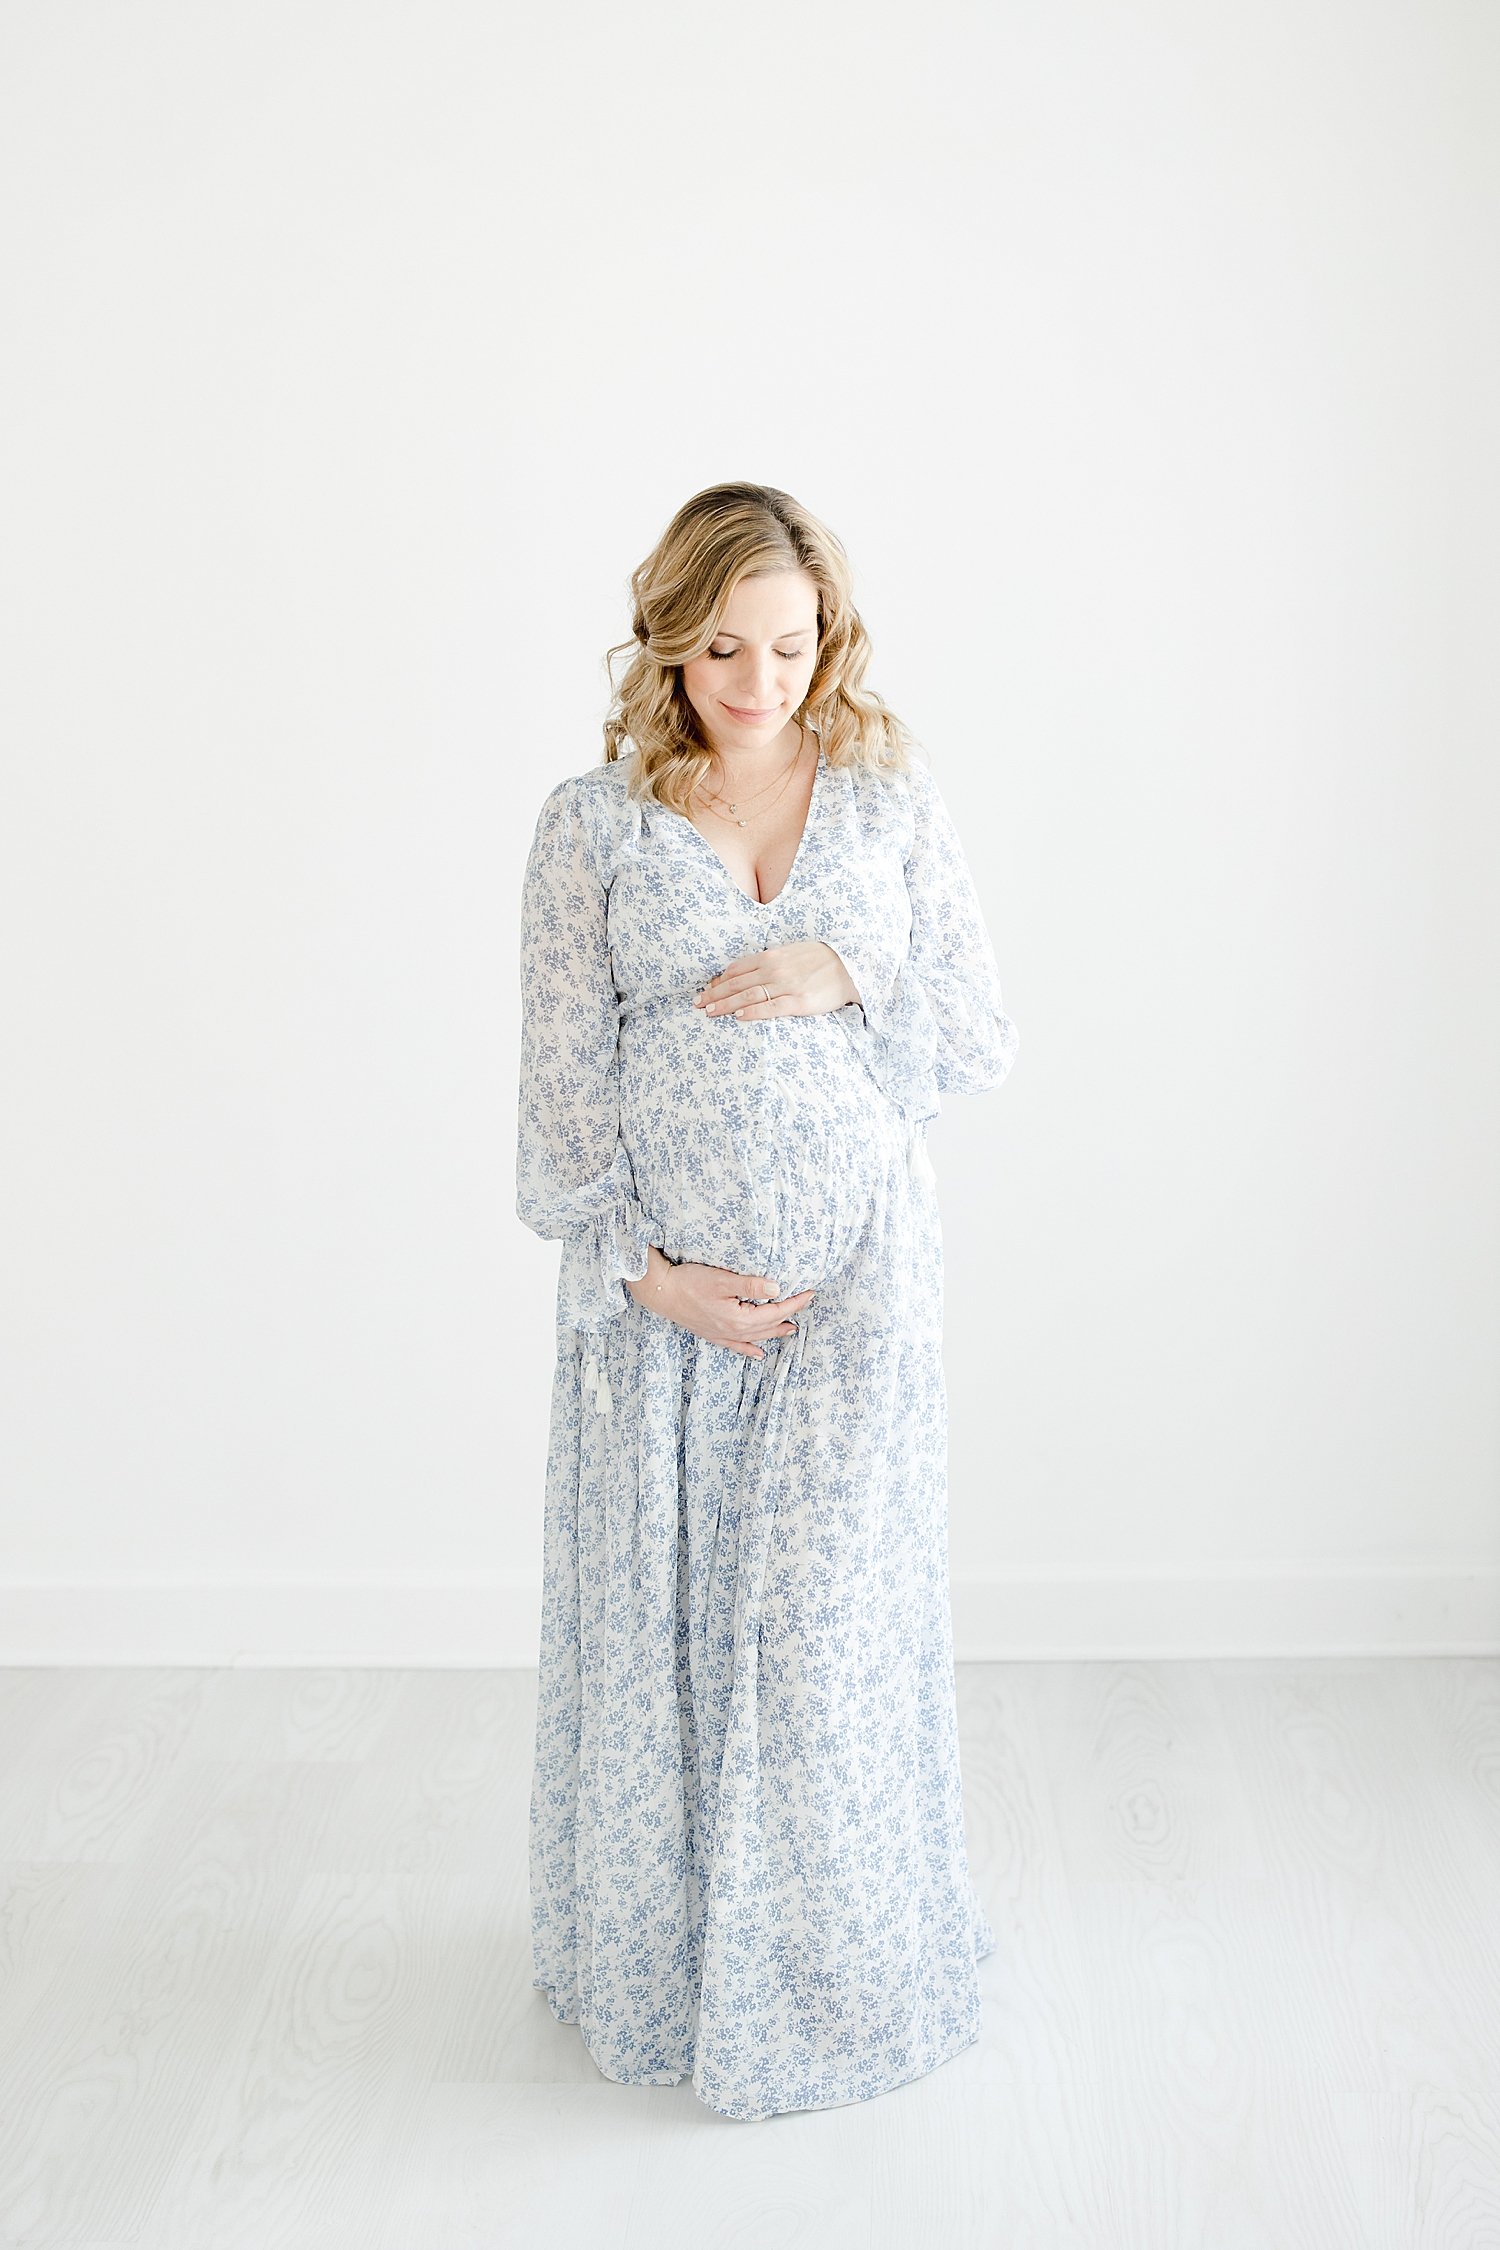 Mom-to-be in beautiful floral blue dress | Kristin Wood Photography